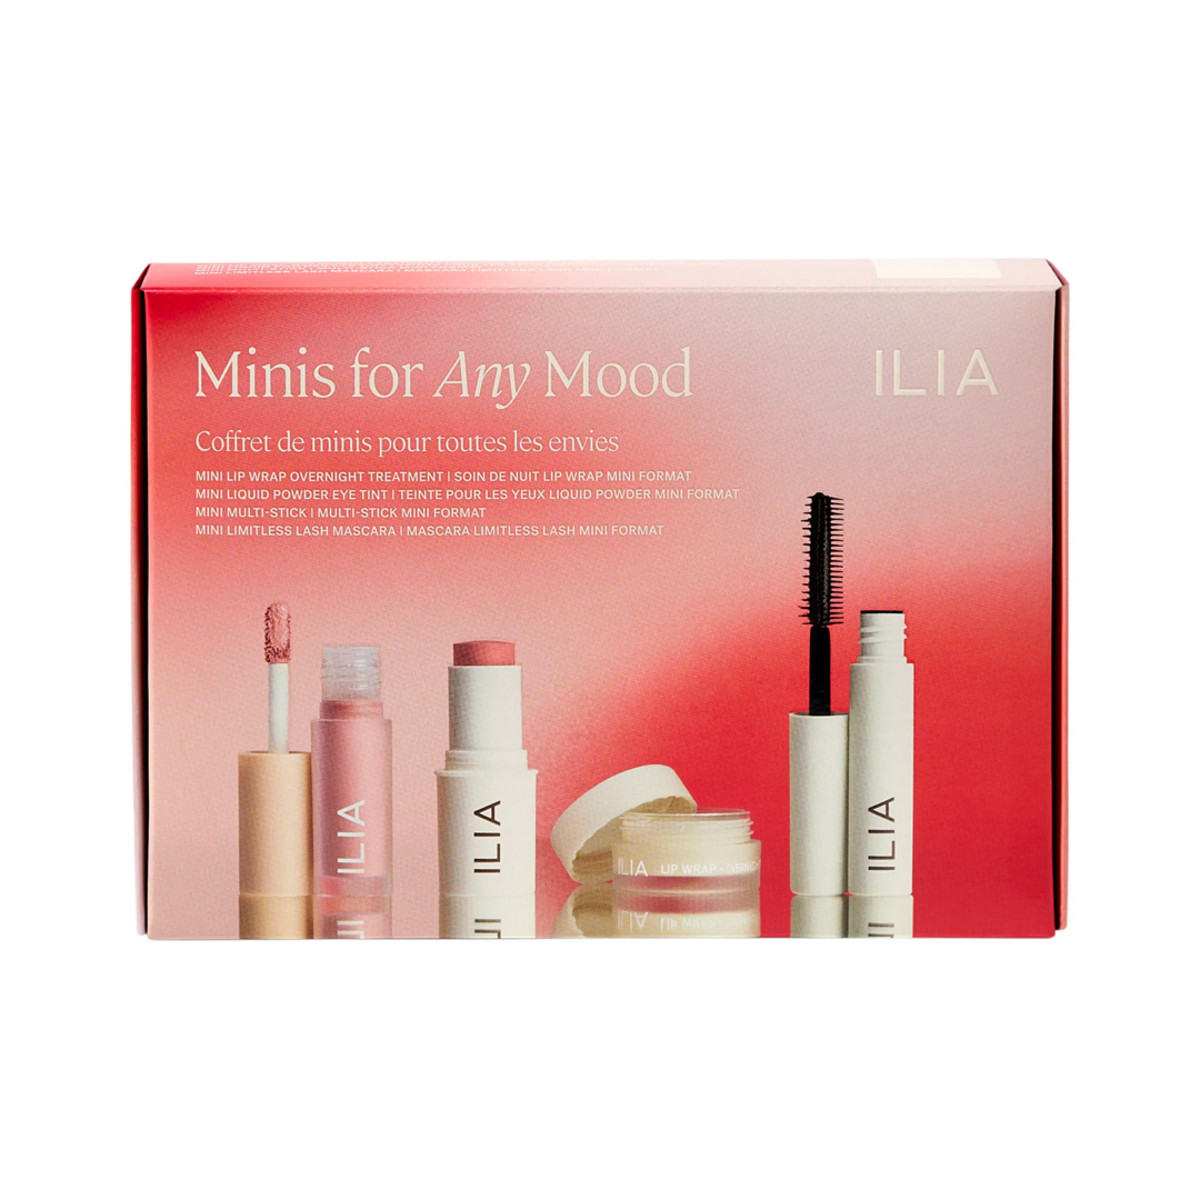 One of the best makeup gift sets for women who love all things beauty, the Ilia Minis For Any Mood Gift Set available now at Sephora